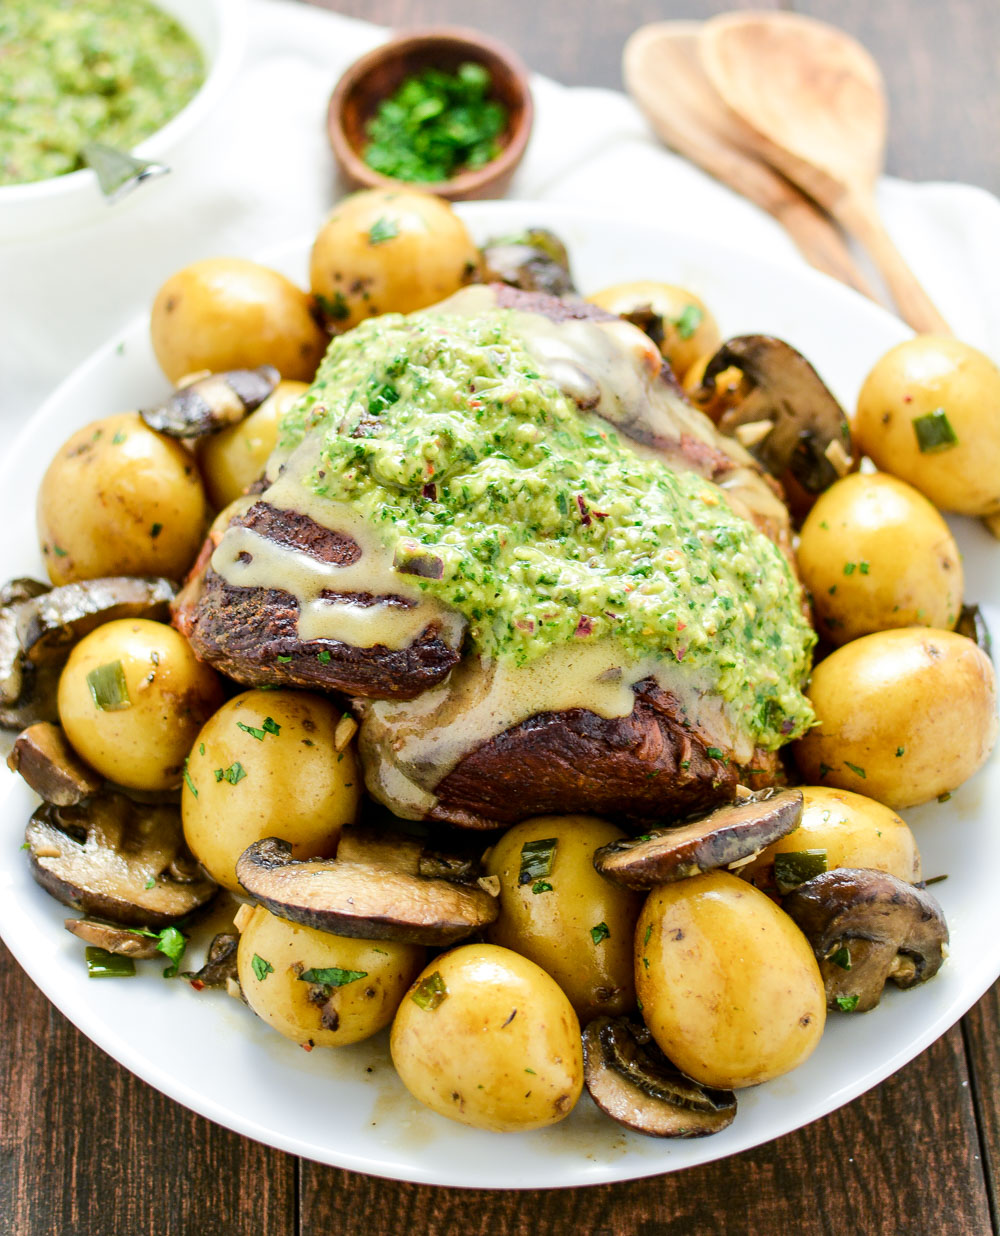 Braised Leg of Lamb with Chimichurri is a comforting and hearty dinner recipe!